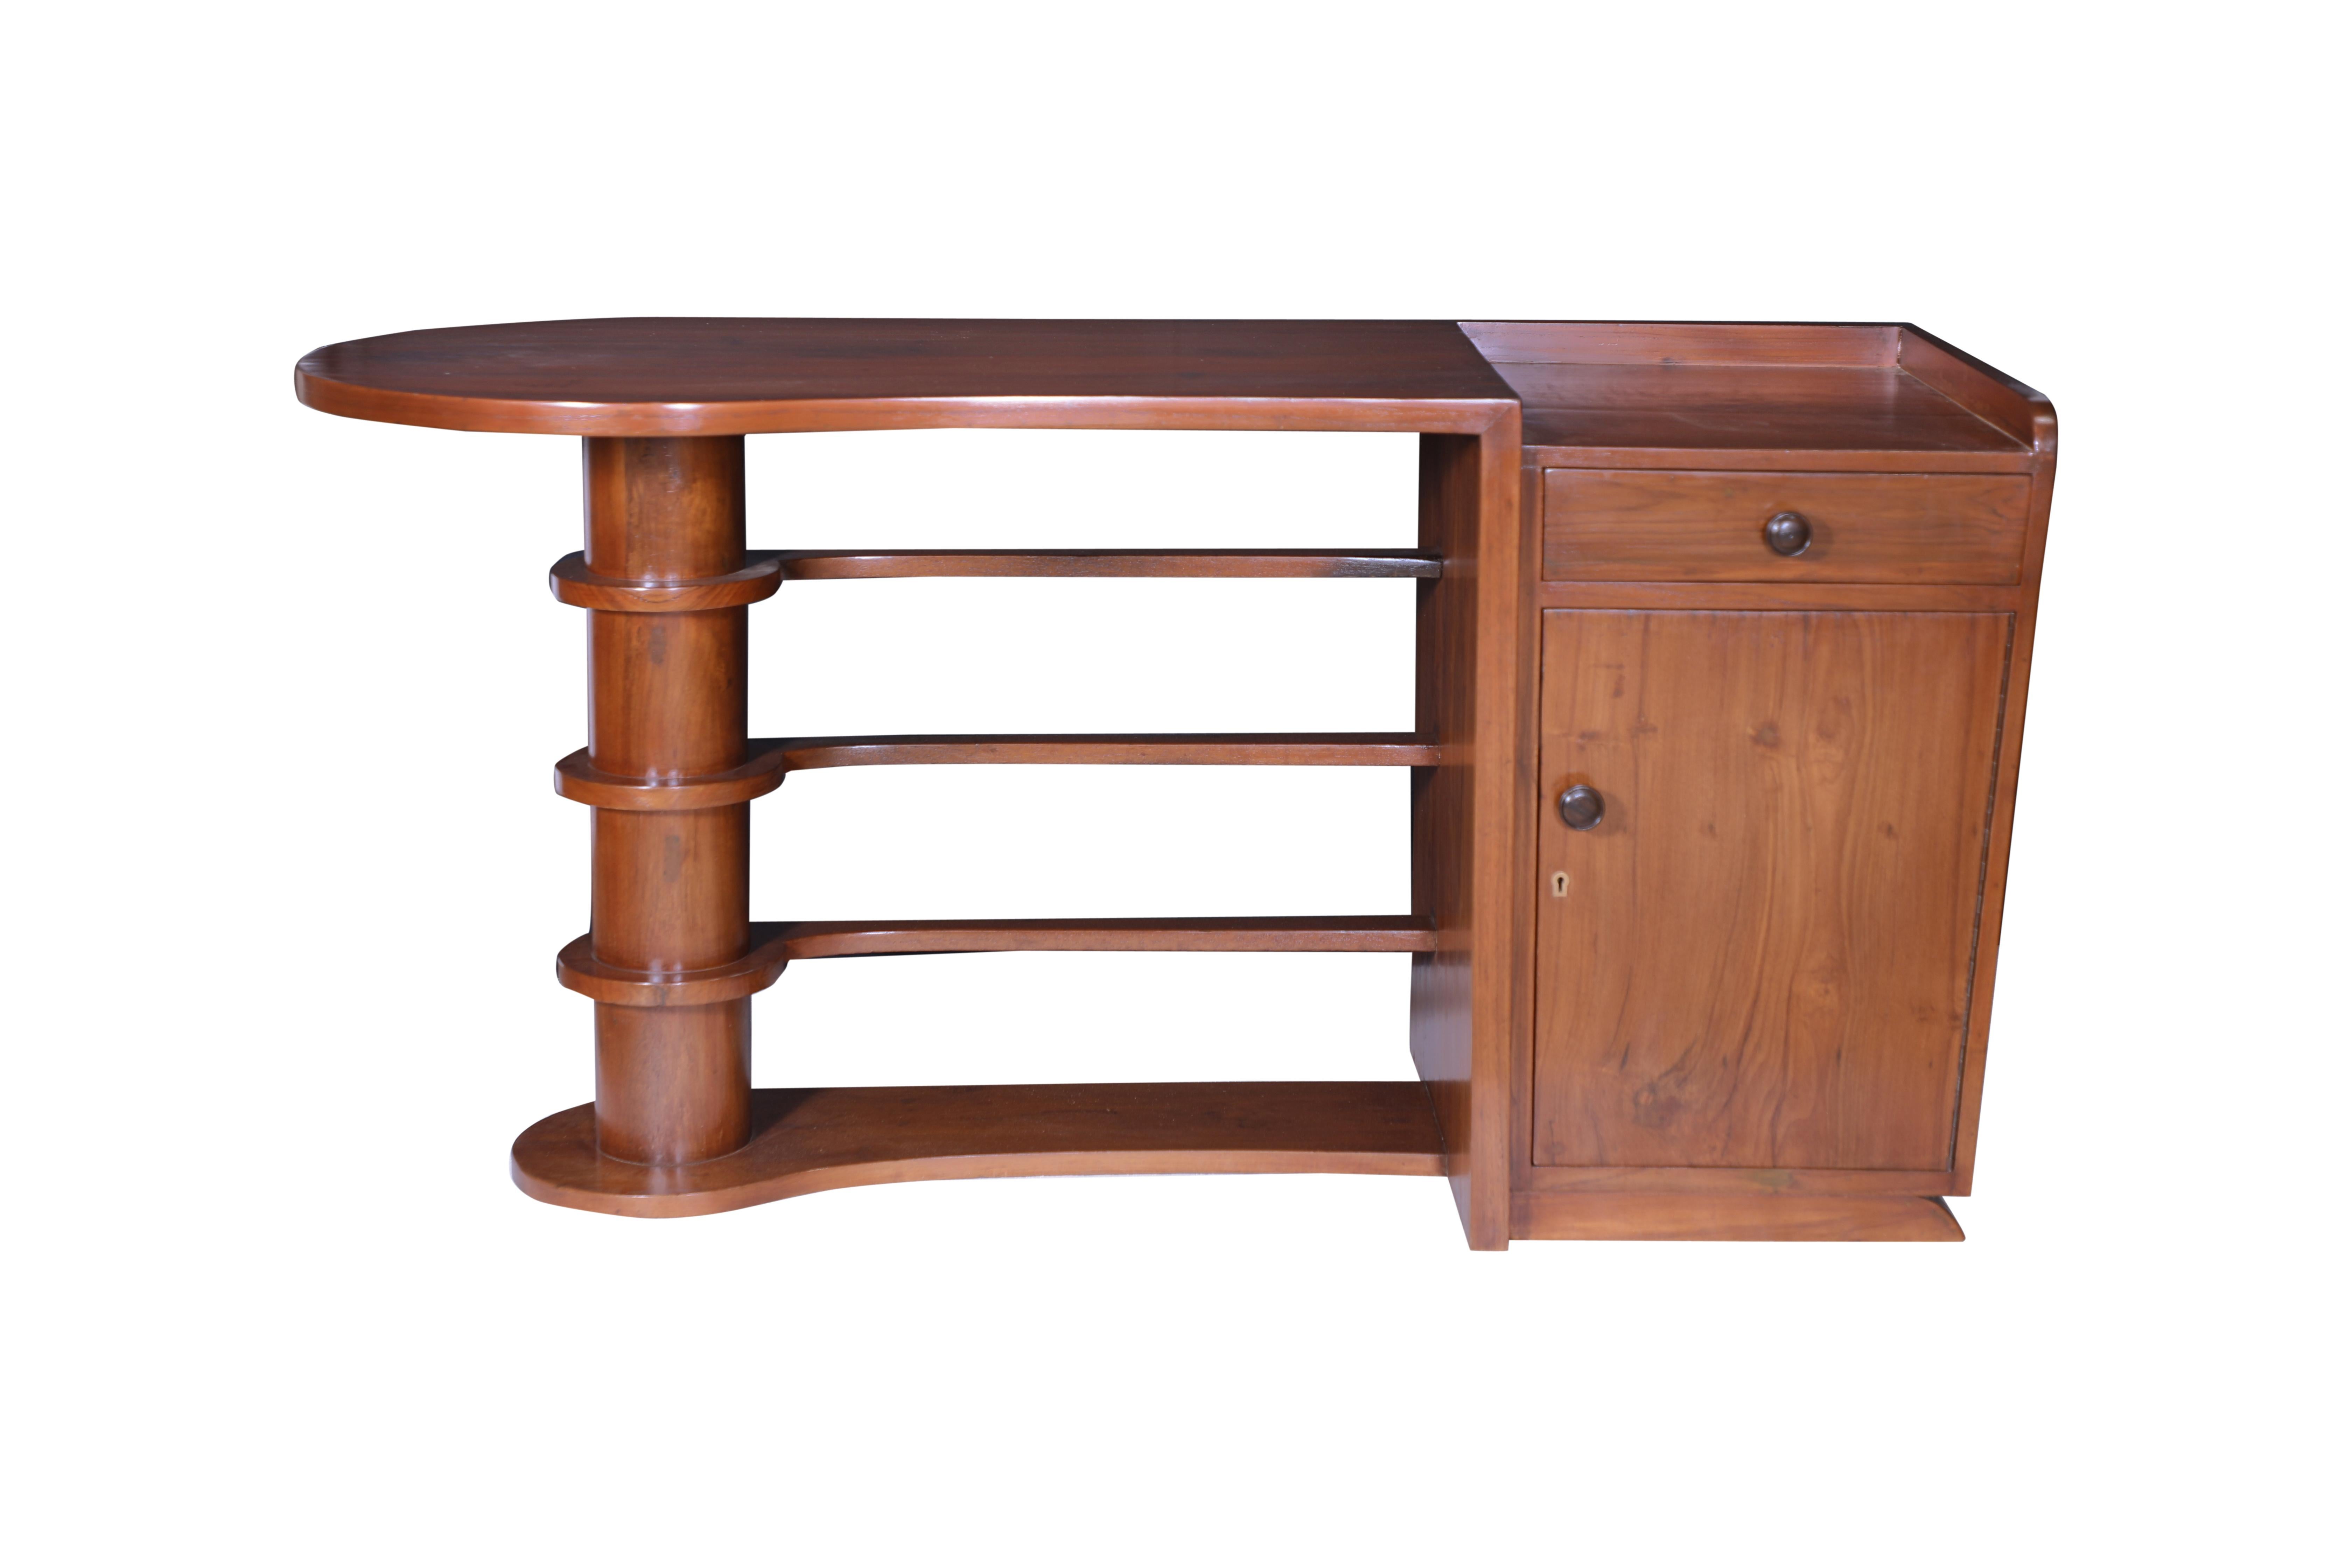 A stunning Mid-Century Modern teak writing desk or could also be used as a console table or as a sofa table.  Teak bars across the front as an architectural accent.  A right hand side cabinet with shelf and a top drawer.  The right side height is